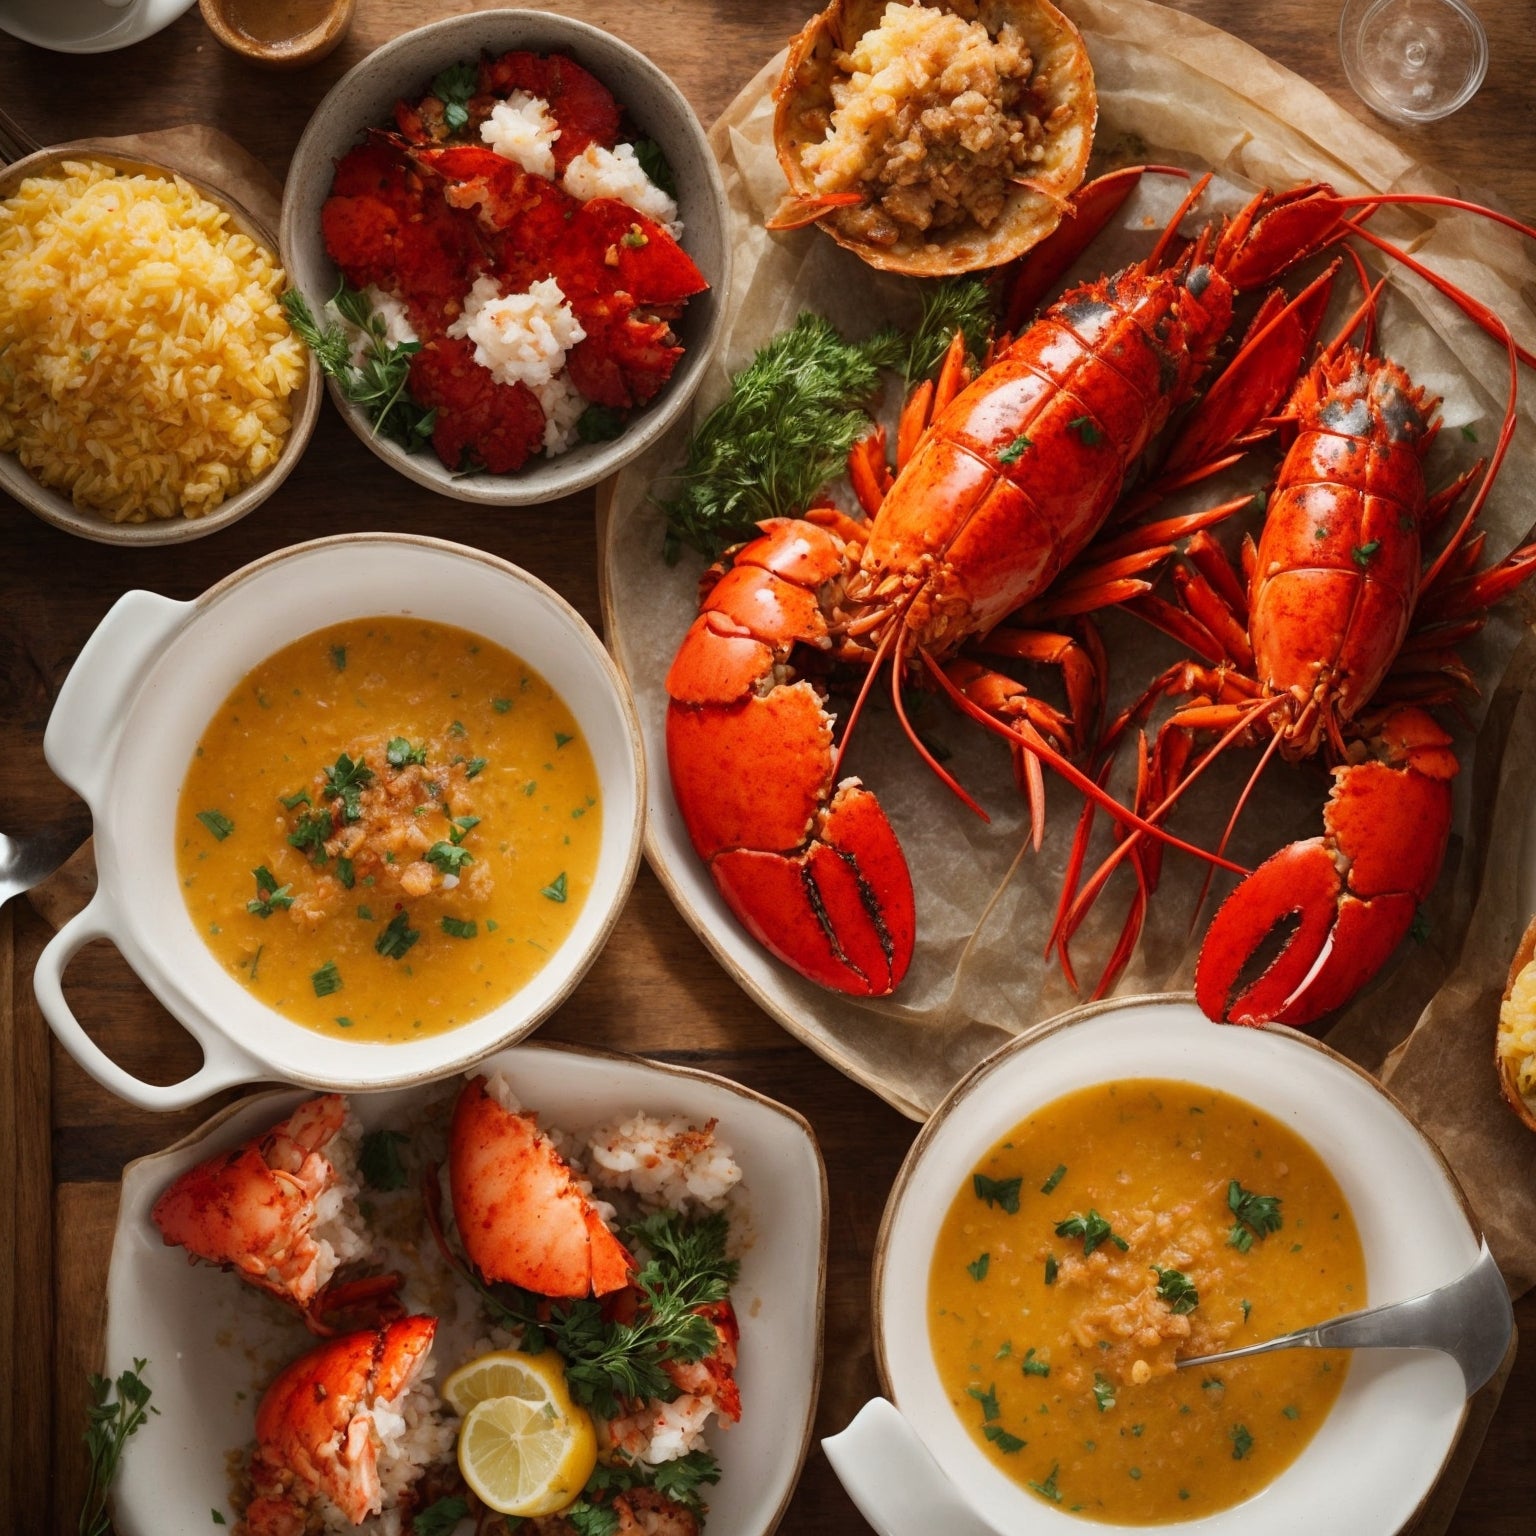 Culinary Majesty: Dive into Globalseafoods.com's Lobster Tail Feast